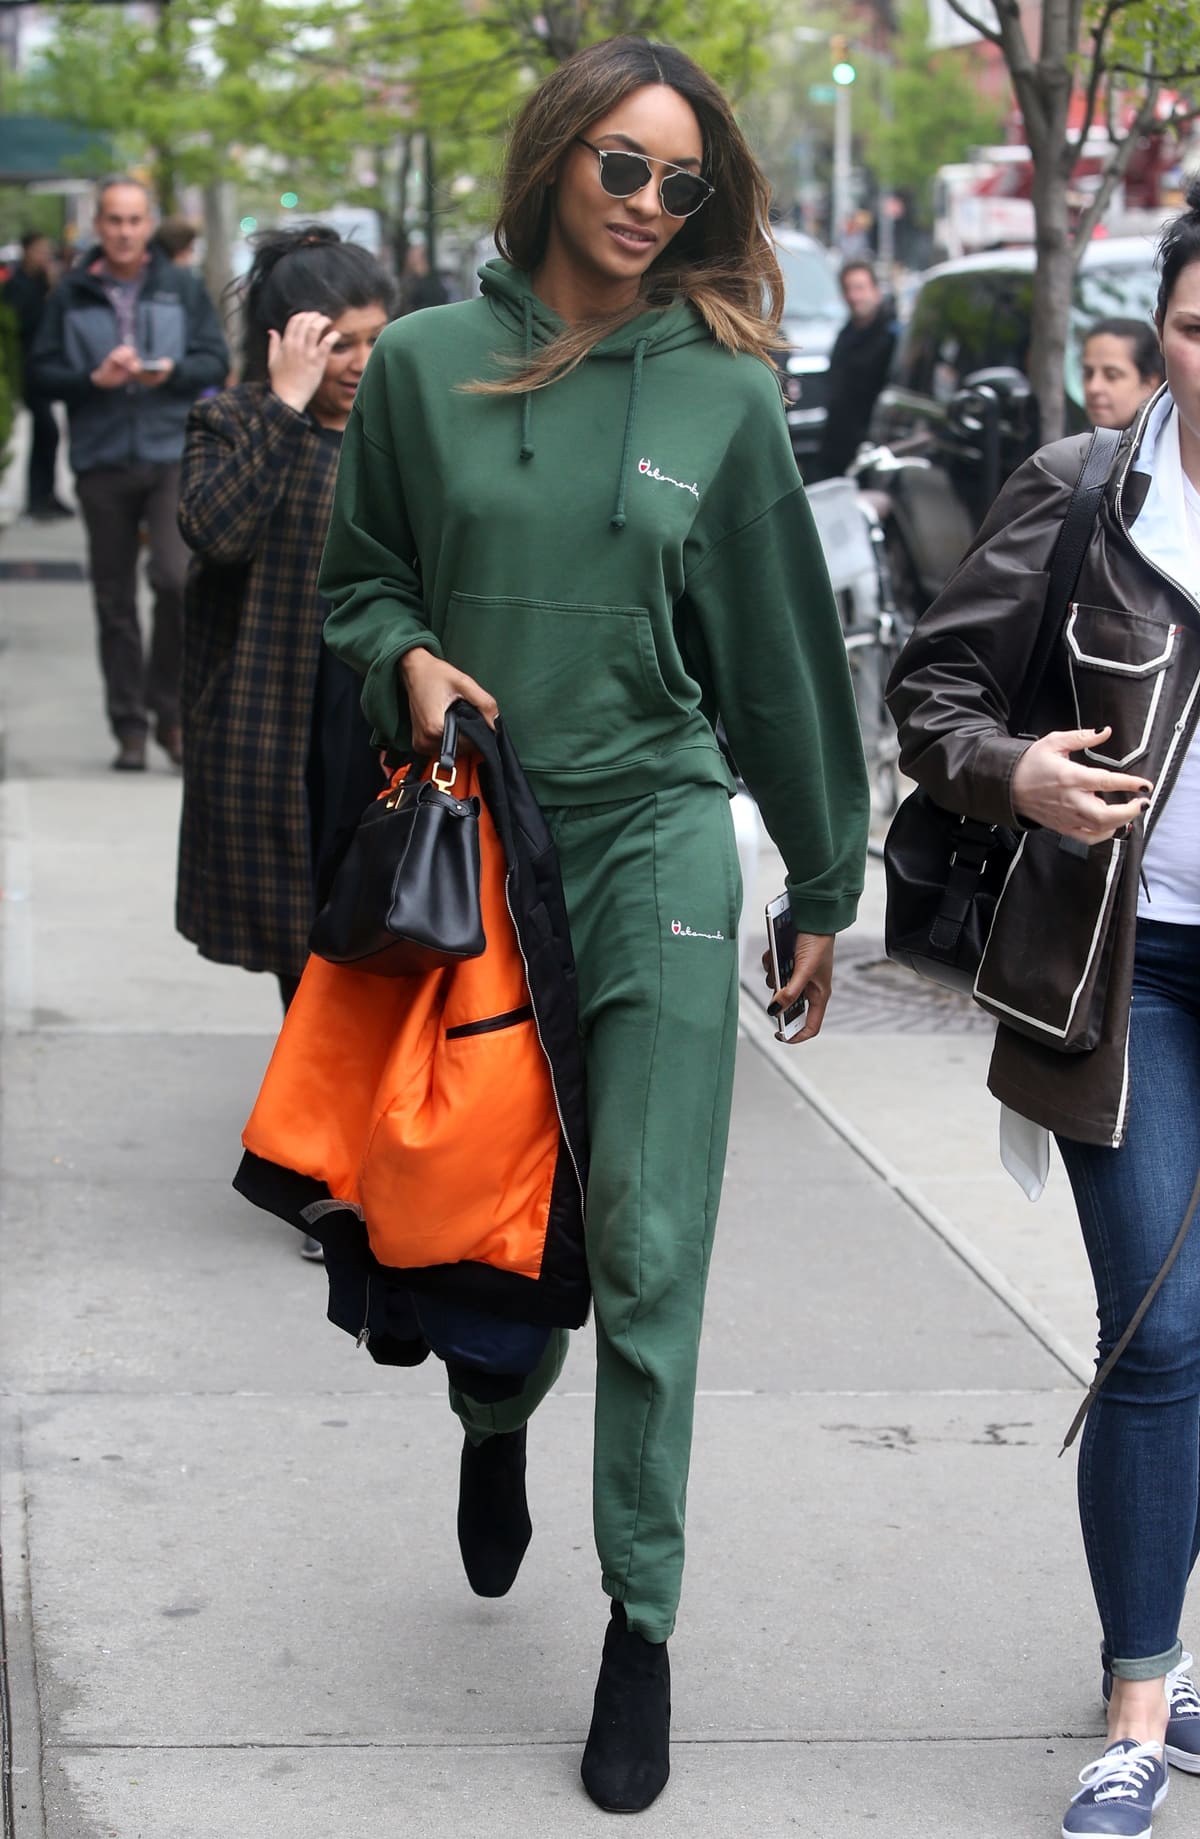 Jourdan Dunn was spotted in a $1,386 emerald green Vetements sweatshirt and track pants ensemble